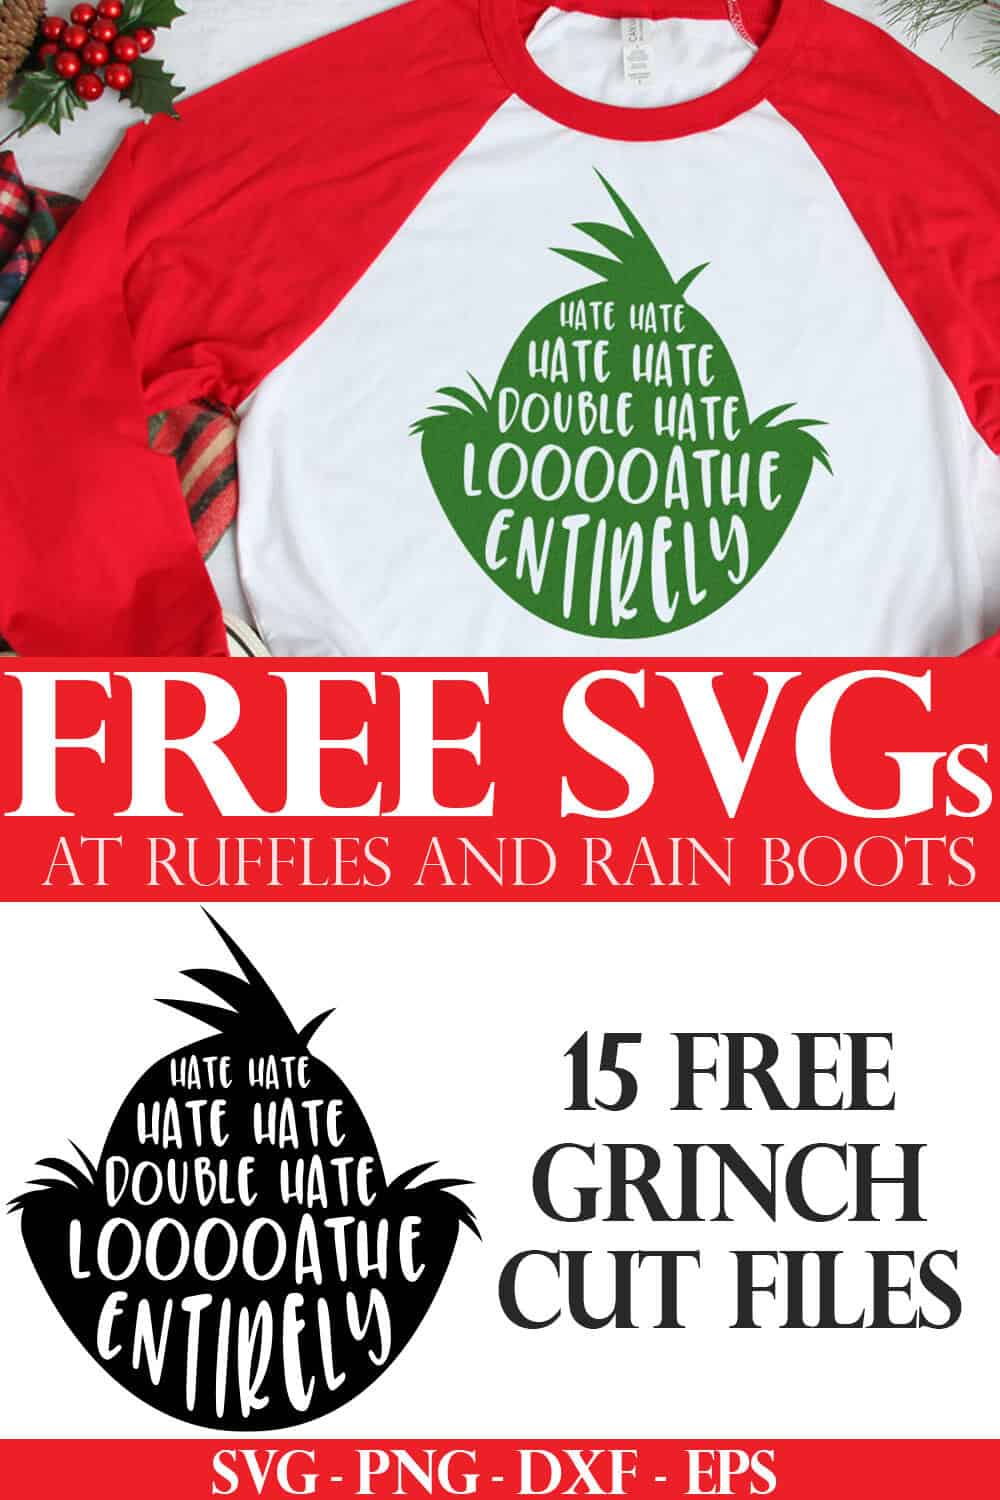 green loathe entirely grinch head svg on red raglan t shirt for holiday Cricut craft idea with text which reads 15 free grinch cut files and free svg at ruffles and rain boots